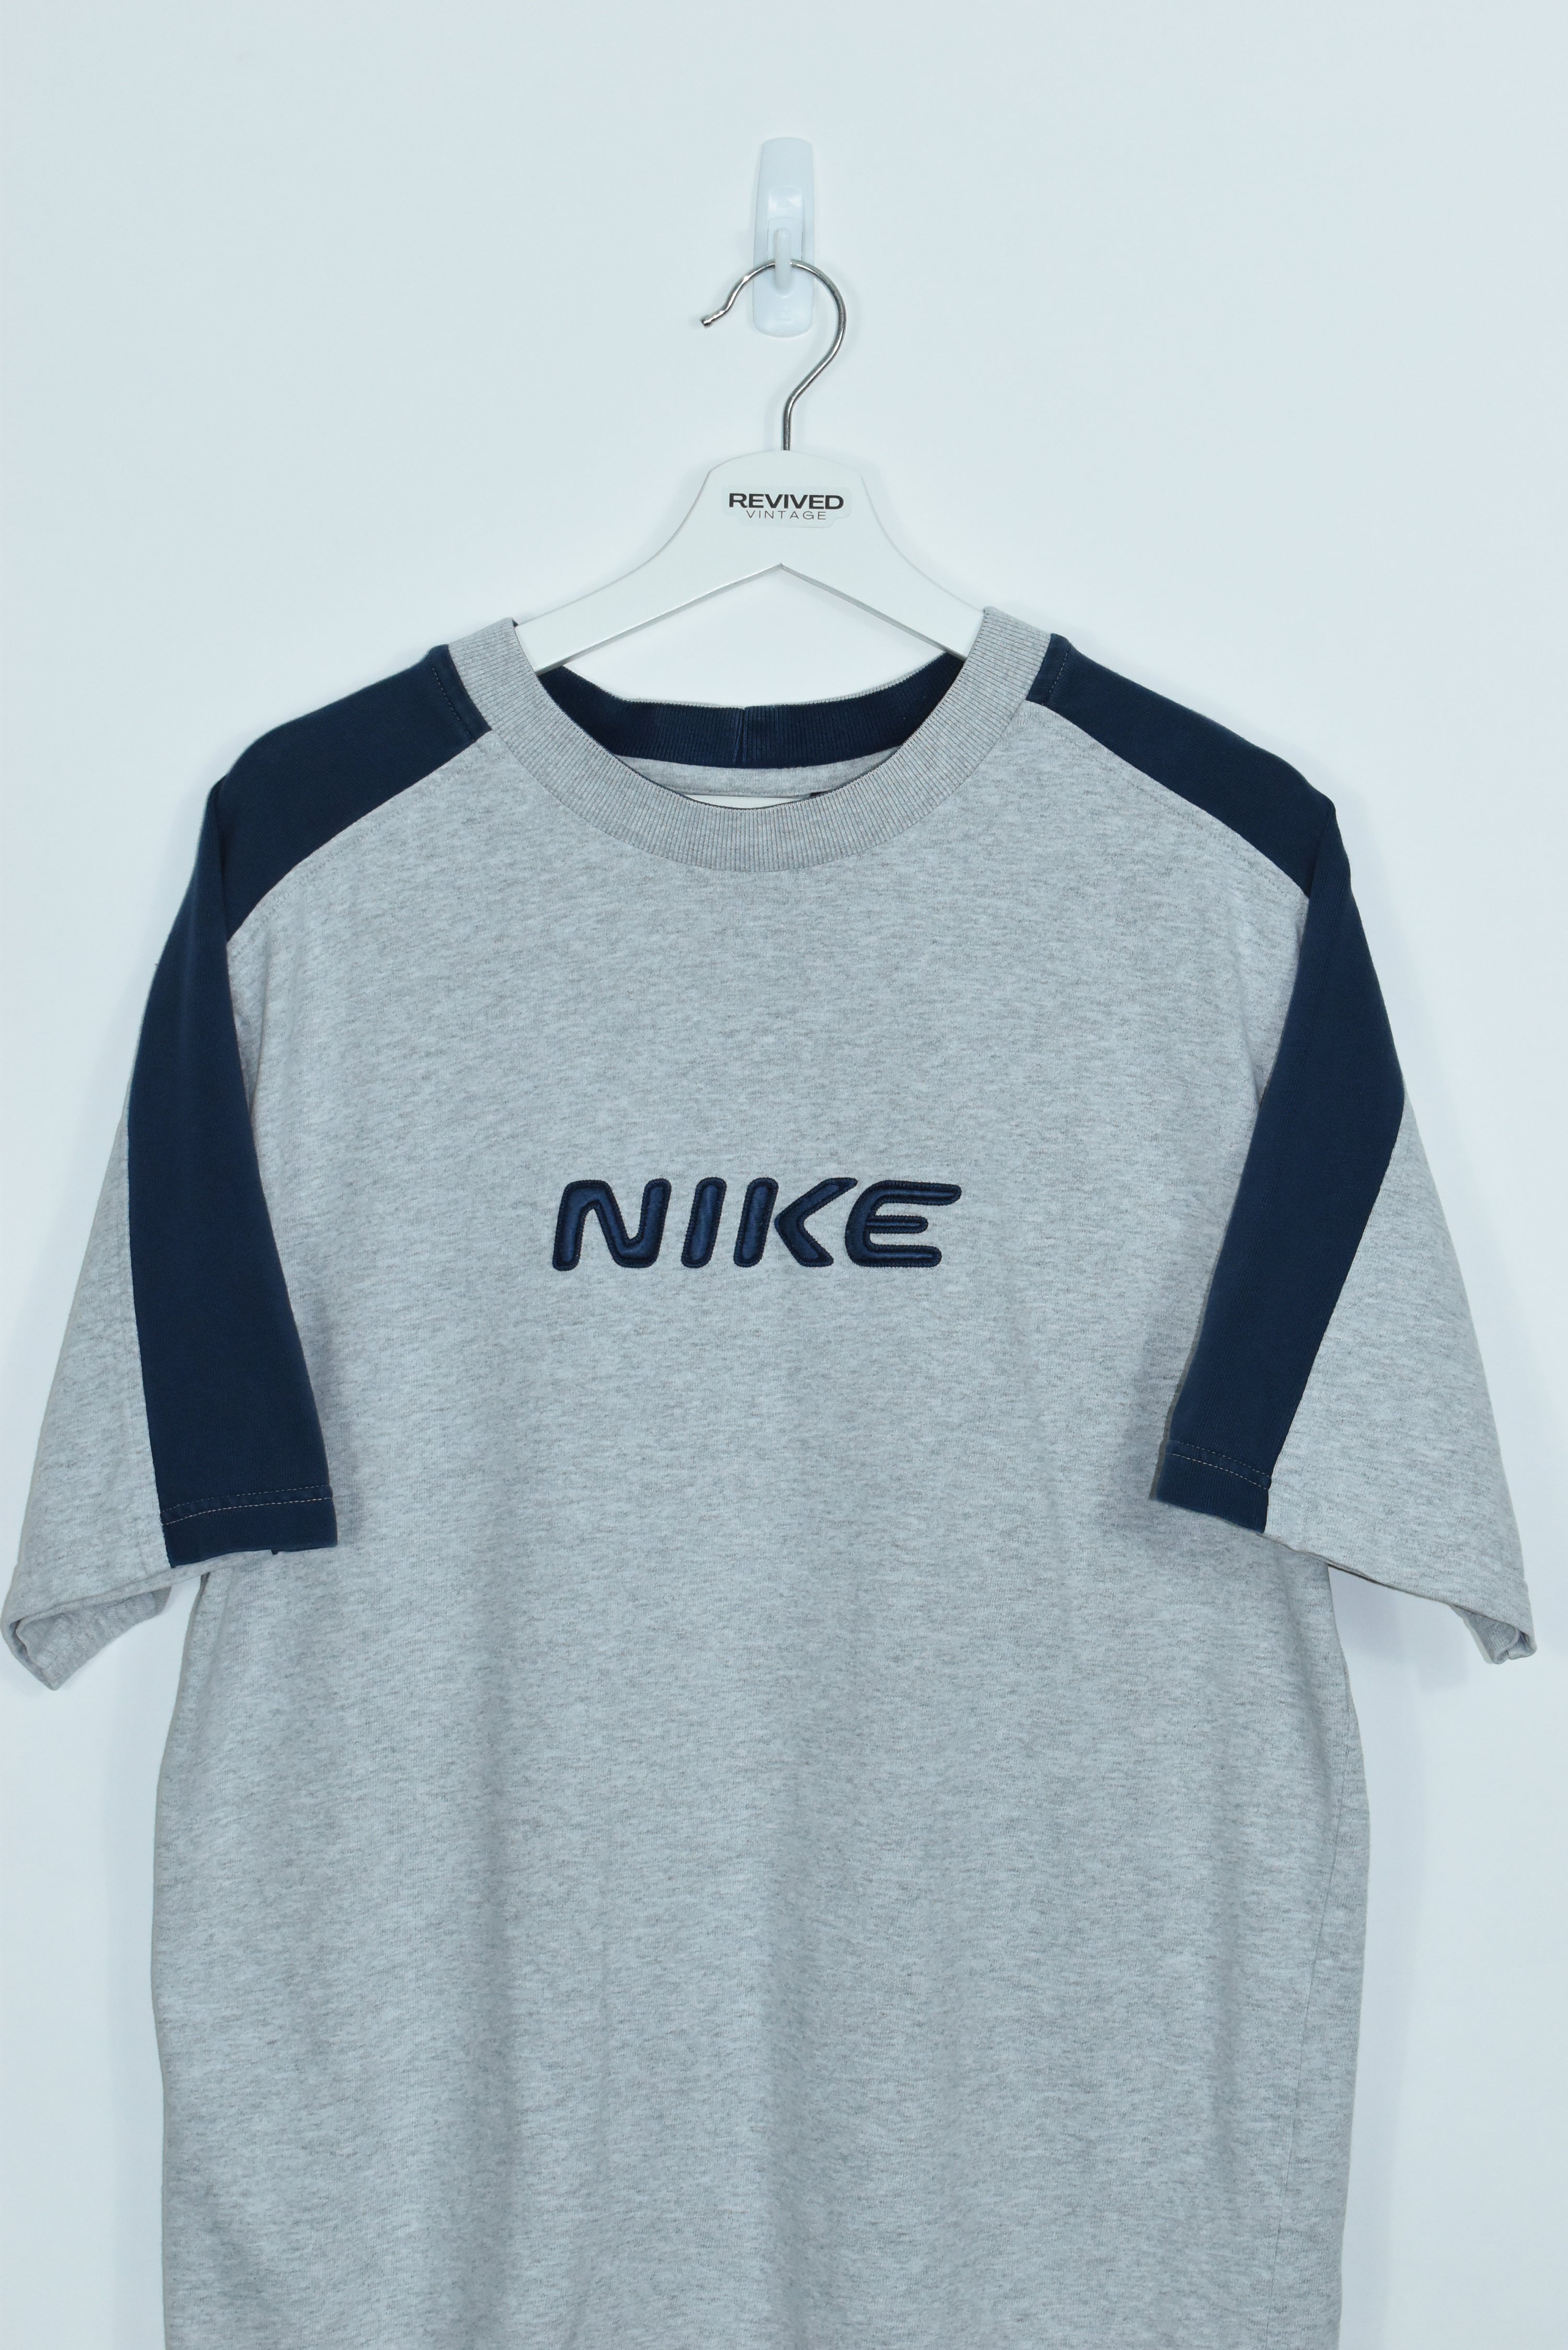 Vintage Nike Puff Print Embroidery T Shirt LARGE